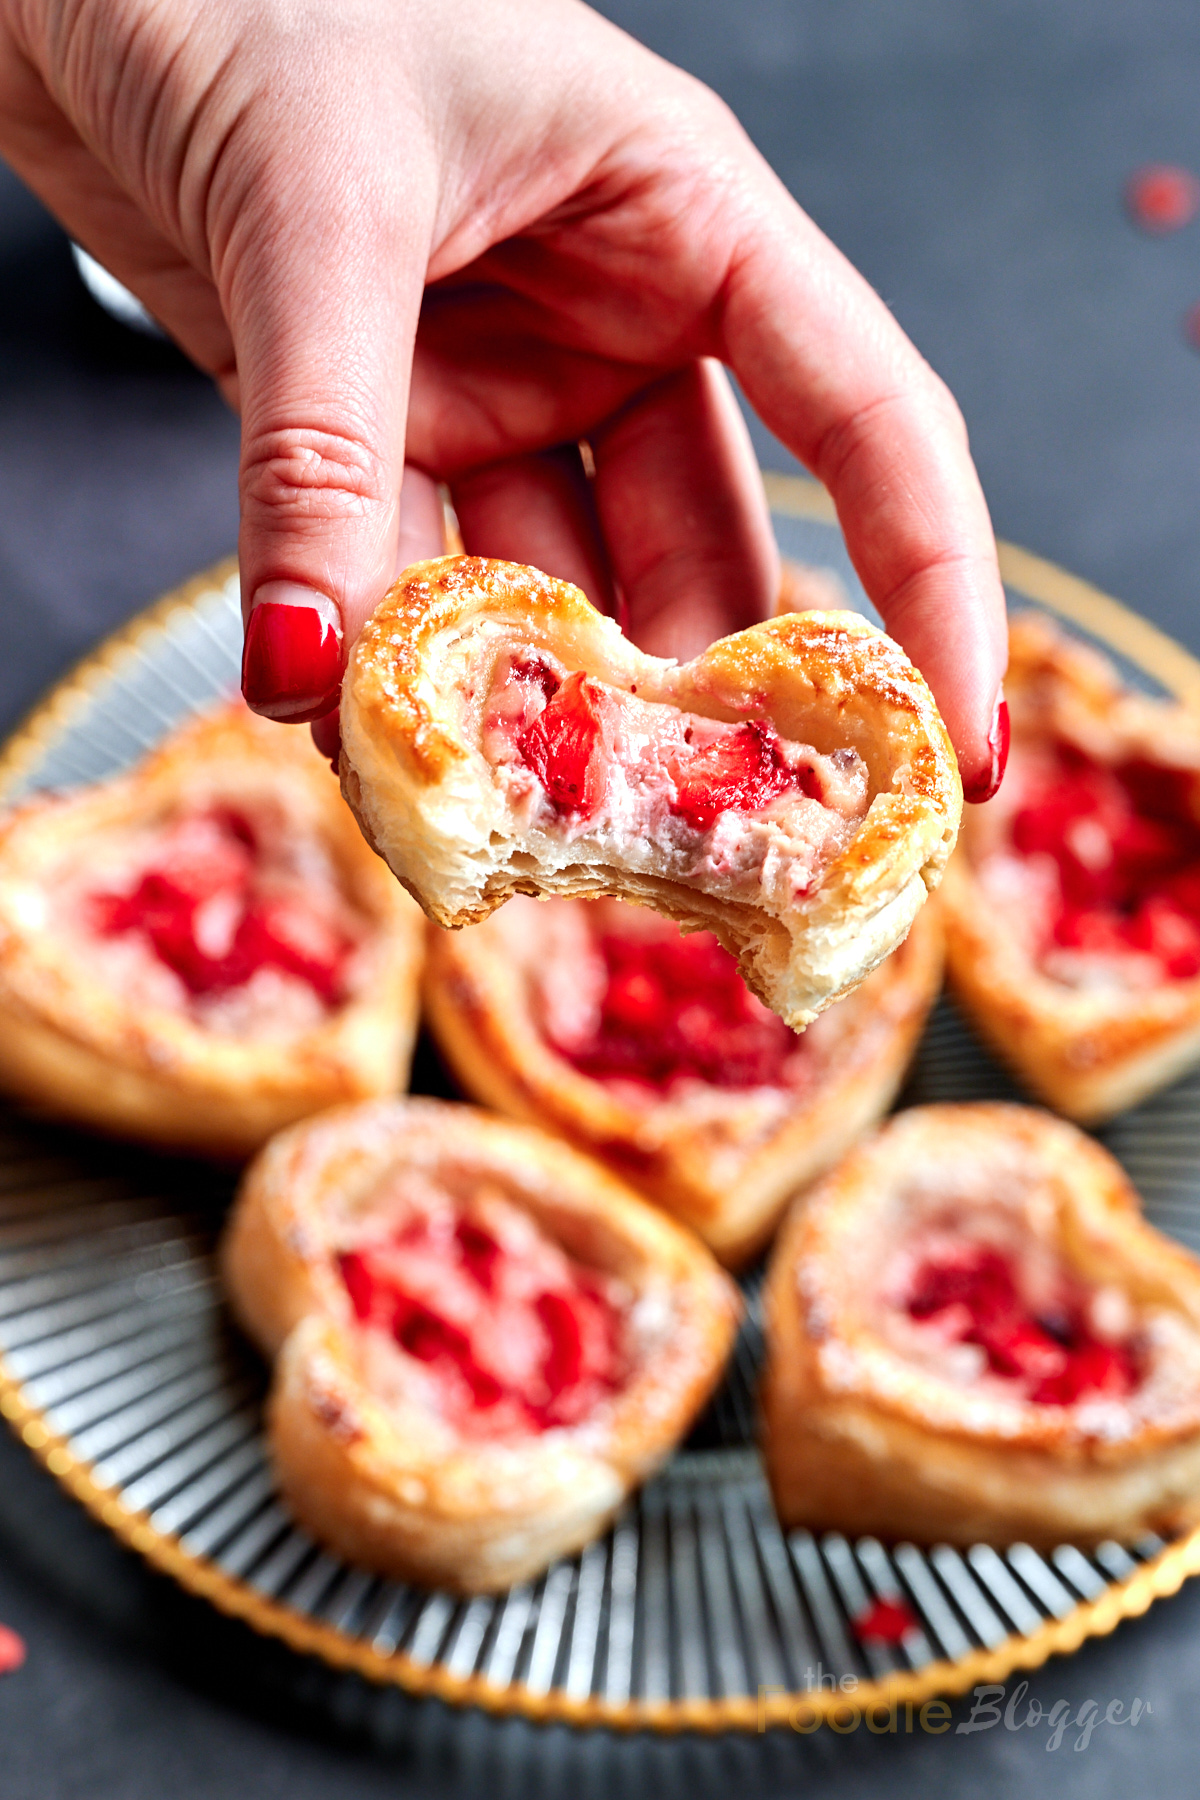 cream cheese strawberry puff pastry hold in hand to show texture and the filling